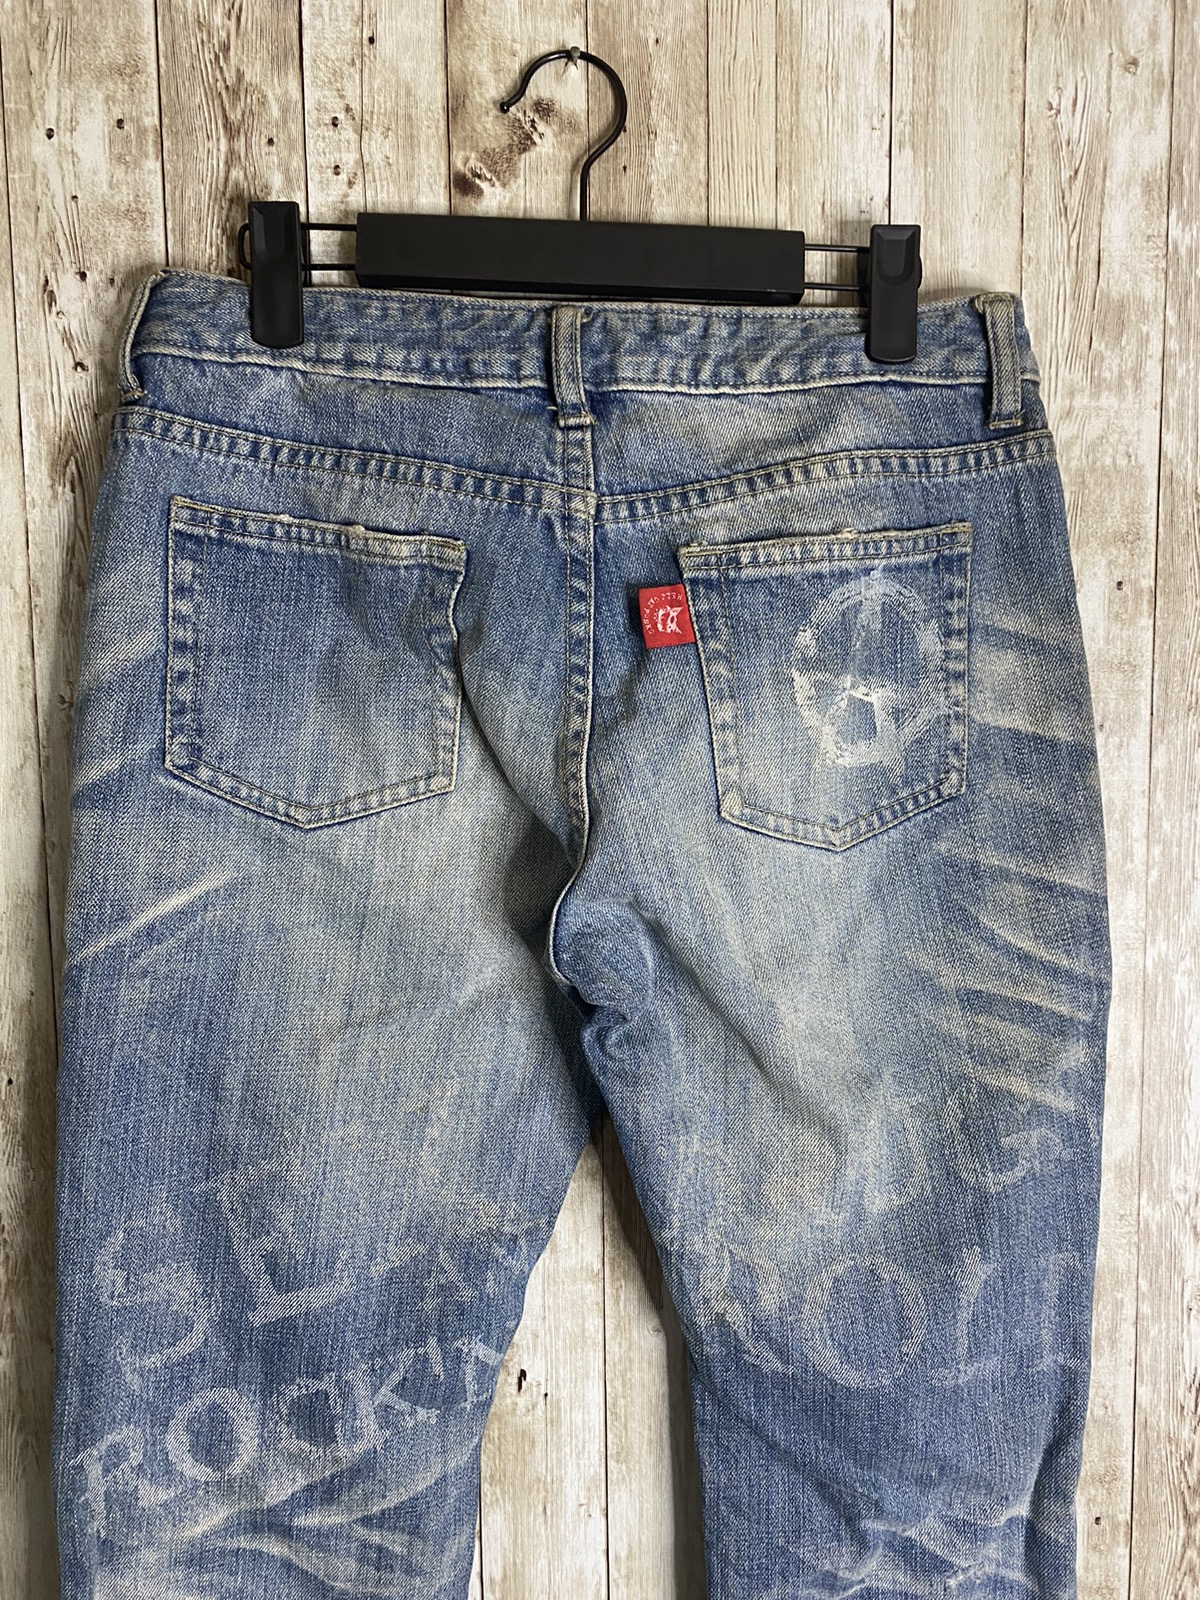 Japanese Brand - Seditionaries Hell Cat Punks Jeans - 7